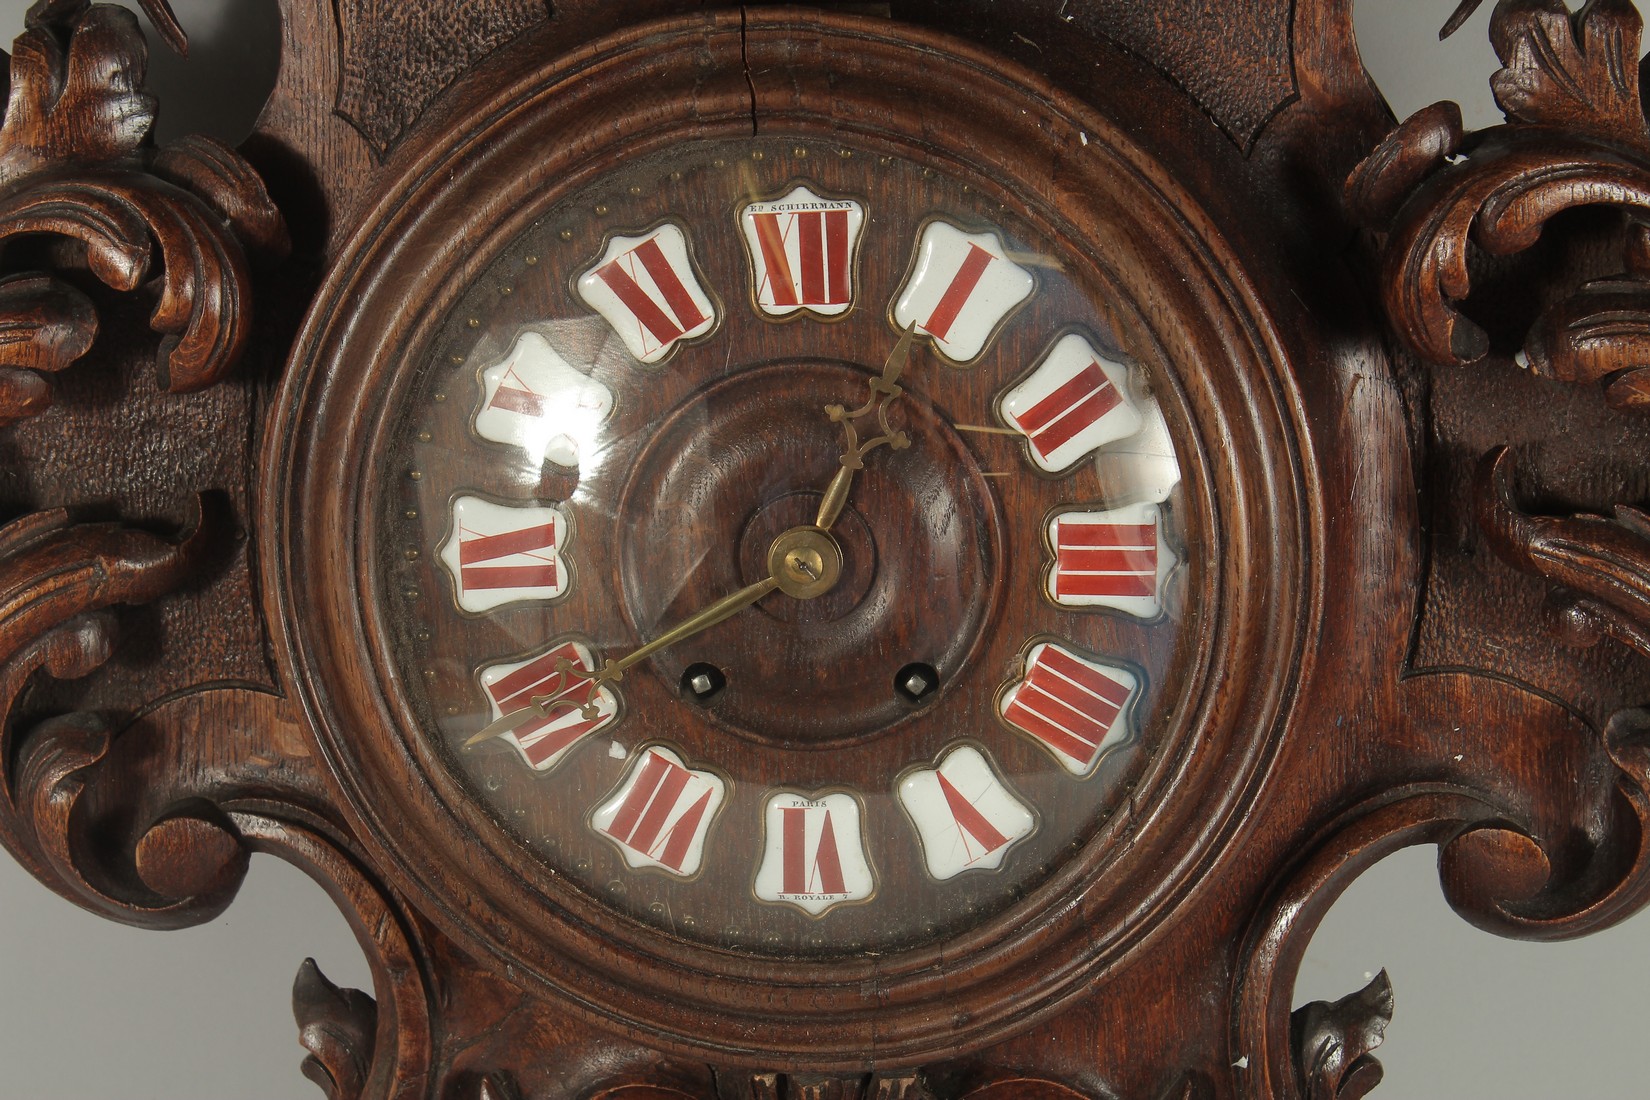 A LARGE CARVED WOOD CLOCK with urns and acanthus scrolls. 28ins high. - Image 4 of 5